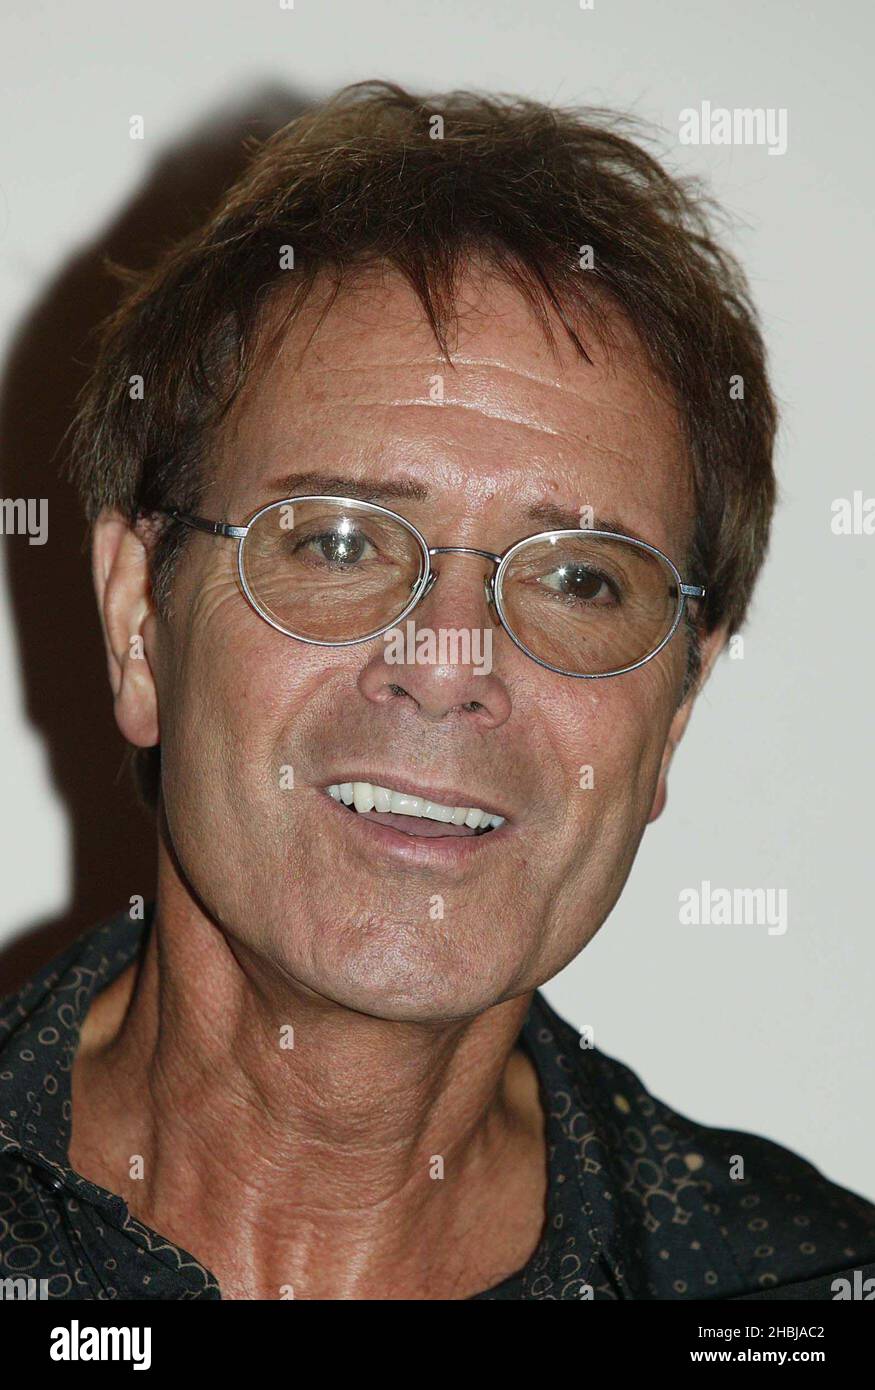 Cliff Richard and his former backing band The Shadows reunite for a photocall prior to the band's final date of last ever tour, at the London Palladium on June 14, 2004 in London. Cliff presents his former backing band with a special gold disc to mark over 100,000 sales of double CD 'Life Story - The Very Best Of The Shadows' which has been in the UK album charts since its release in April.   Cliff Richard, Stock Photo